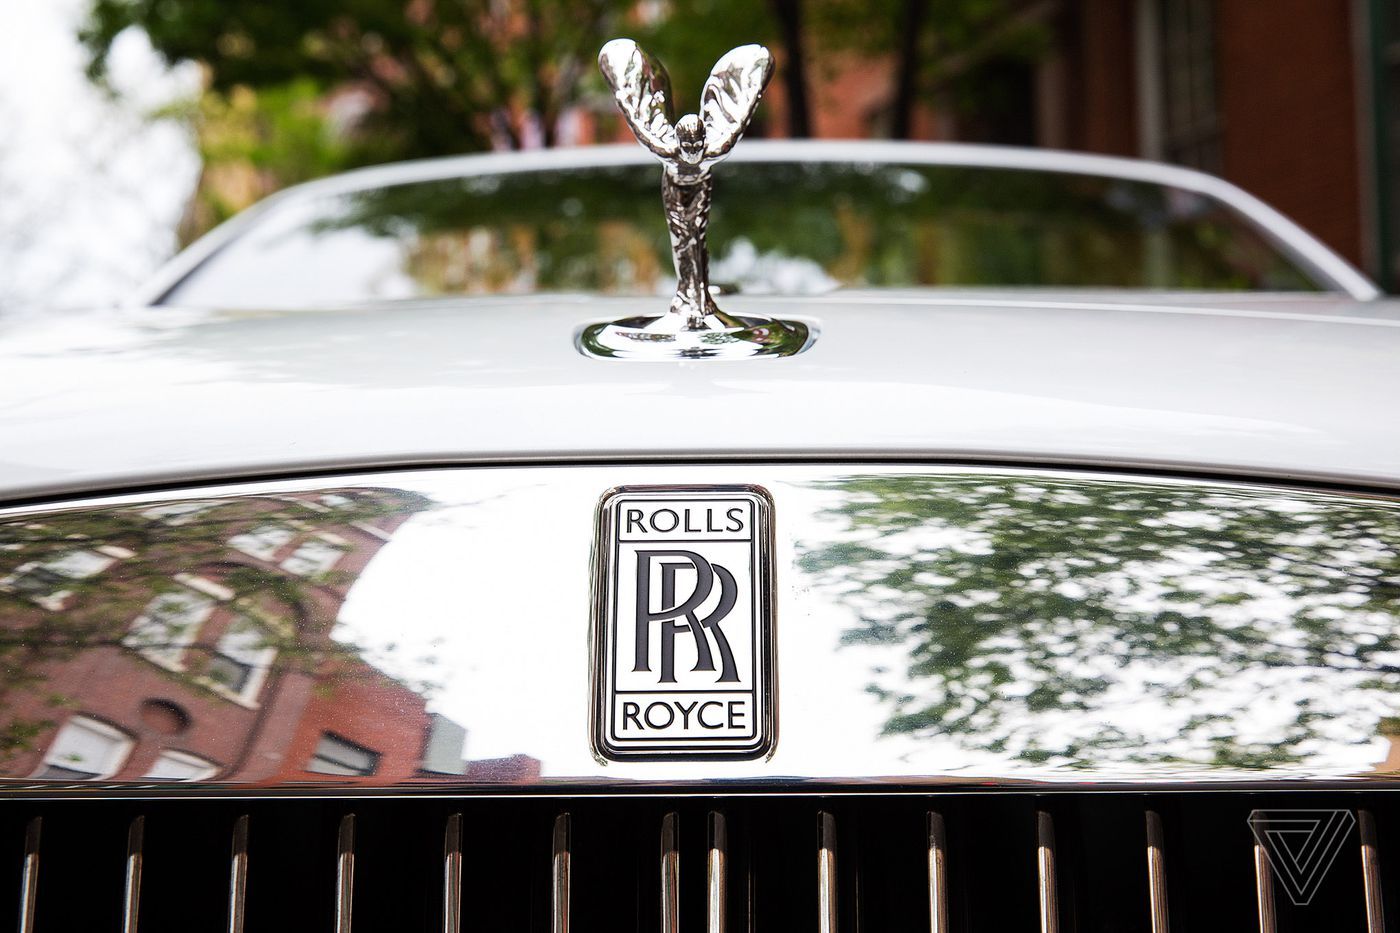 ScreenDrive: The $000 Rolls Royce Dawn Plays It Safe With Limited Tech